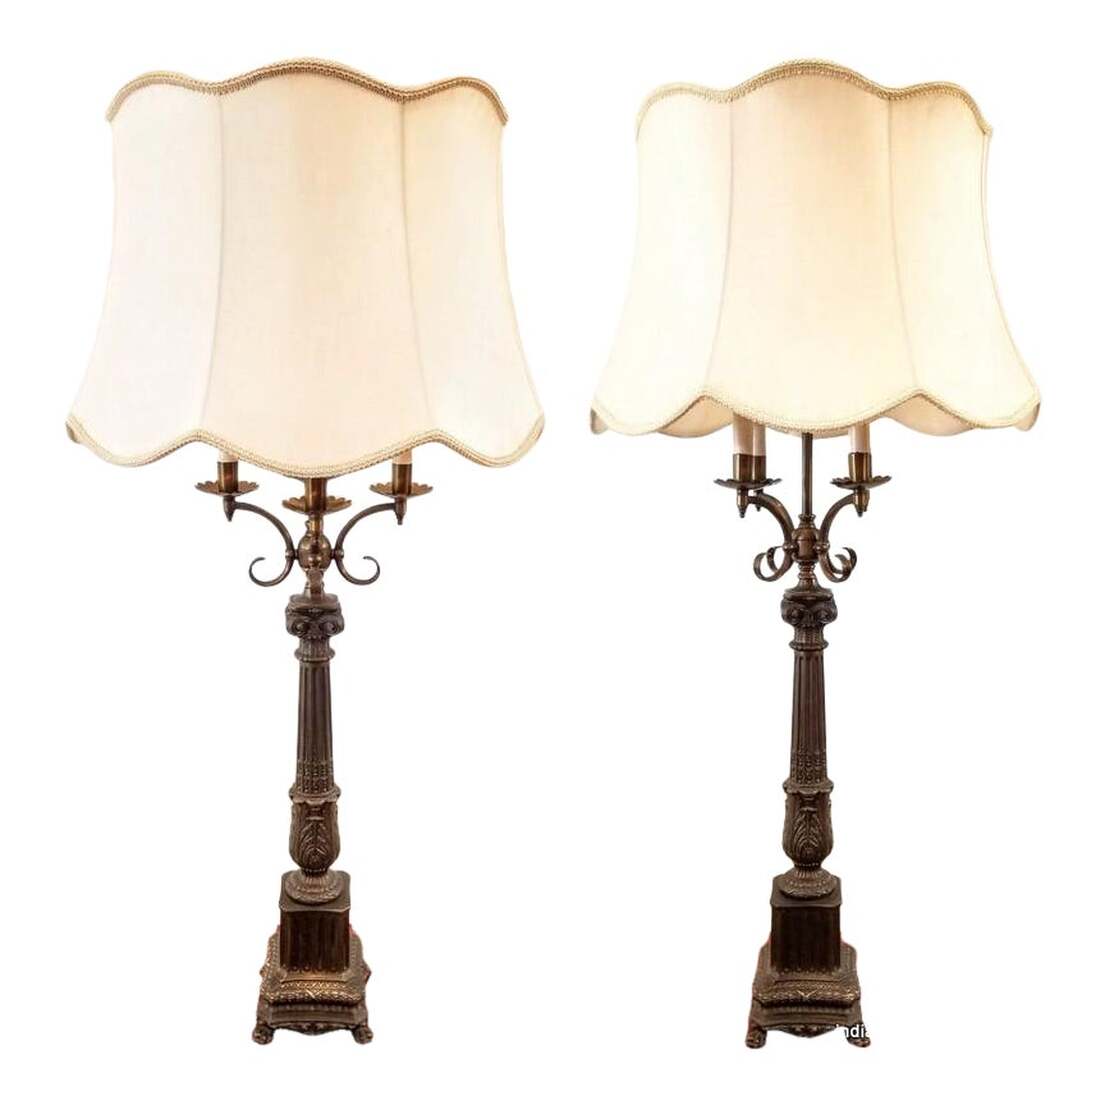 Pair tall metal table lamps in the French Empire candelabra style date to 1920-1926, a period of revival in this style of lighting.  The patinaed brass candelabra form features Neoclassical elements such as scalloped bobeche supported by fluted scrolls collared by bosses; acanthus fluted Ionic columns supported by laurel wreath surmounted plinths; and lion paw and claw feet.  Each lamp has a scalloped and trimmed hand constructed creamy white silk shade. The lighting is activated by three-way black rotary knob switches. The first rotation turns on just the candle flame bulbs; the second rotation turns on just the central light bulbs; the third rotations turns on all the lights; and the fourth rotation turns the lamps off. SIZE:  42.5